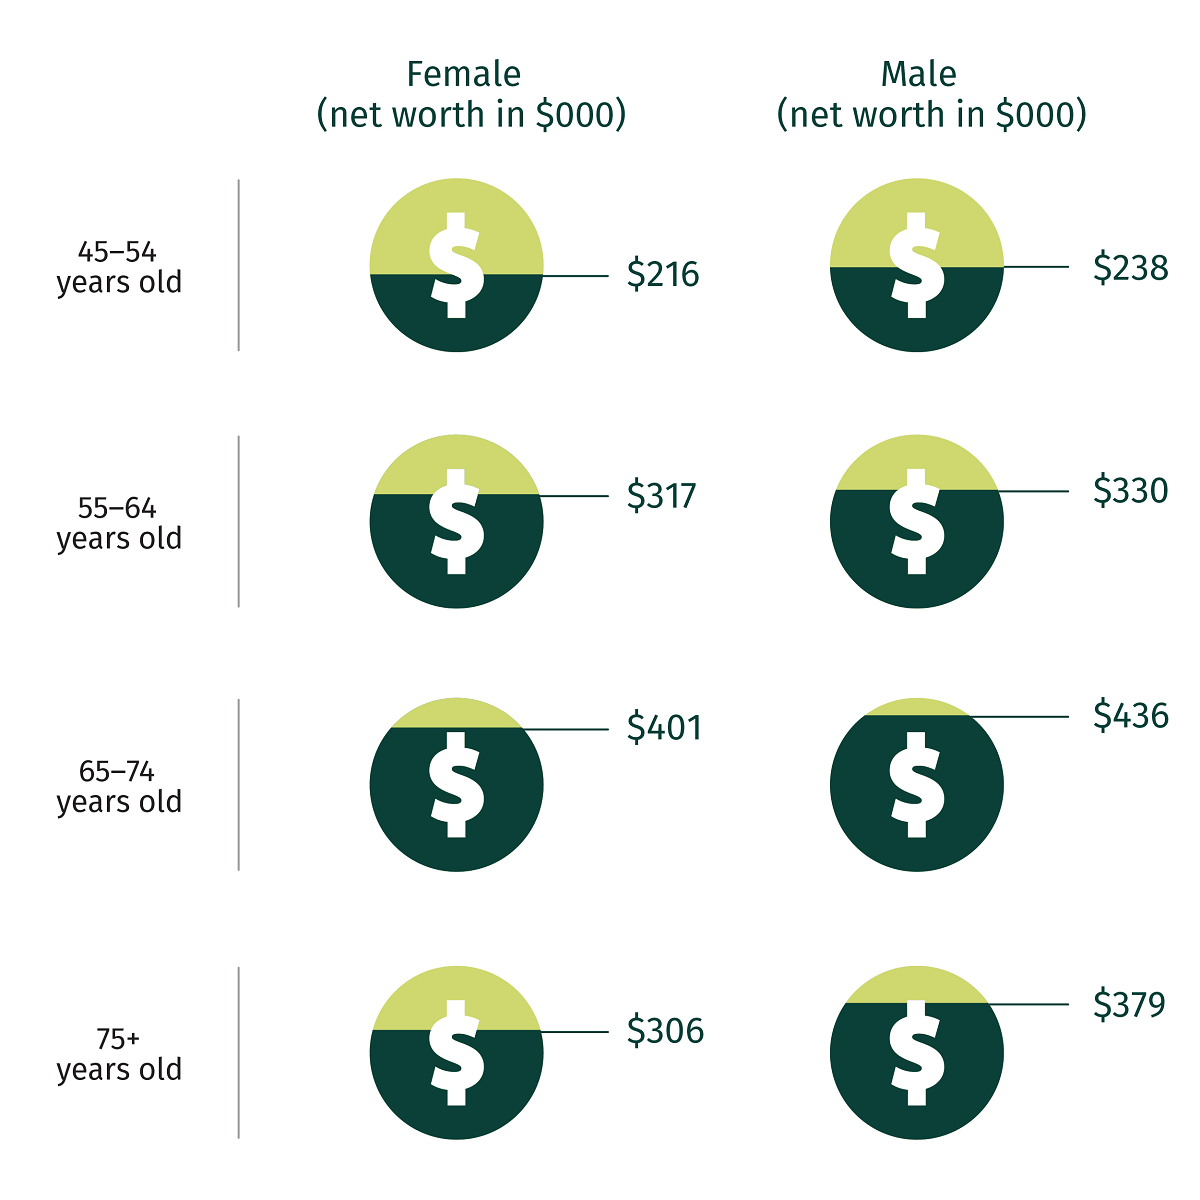 Women tend to have lower levels of wealth (assets minus debt), numbers being new worth in $000. 45-54 years old; Female: $216, Male: $238. 55-64 years old; Female: $317, Male: $330. 65-74 years old; Female: $401, Male: $436. 75+ years old; Female: $306, Male: $379.